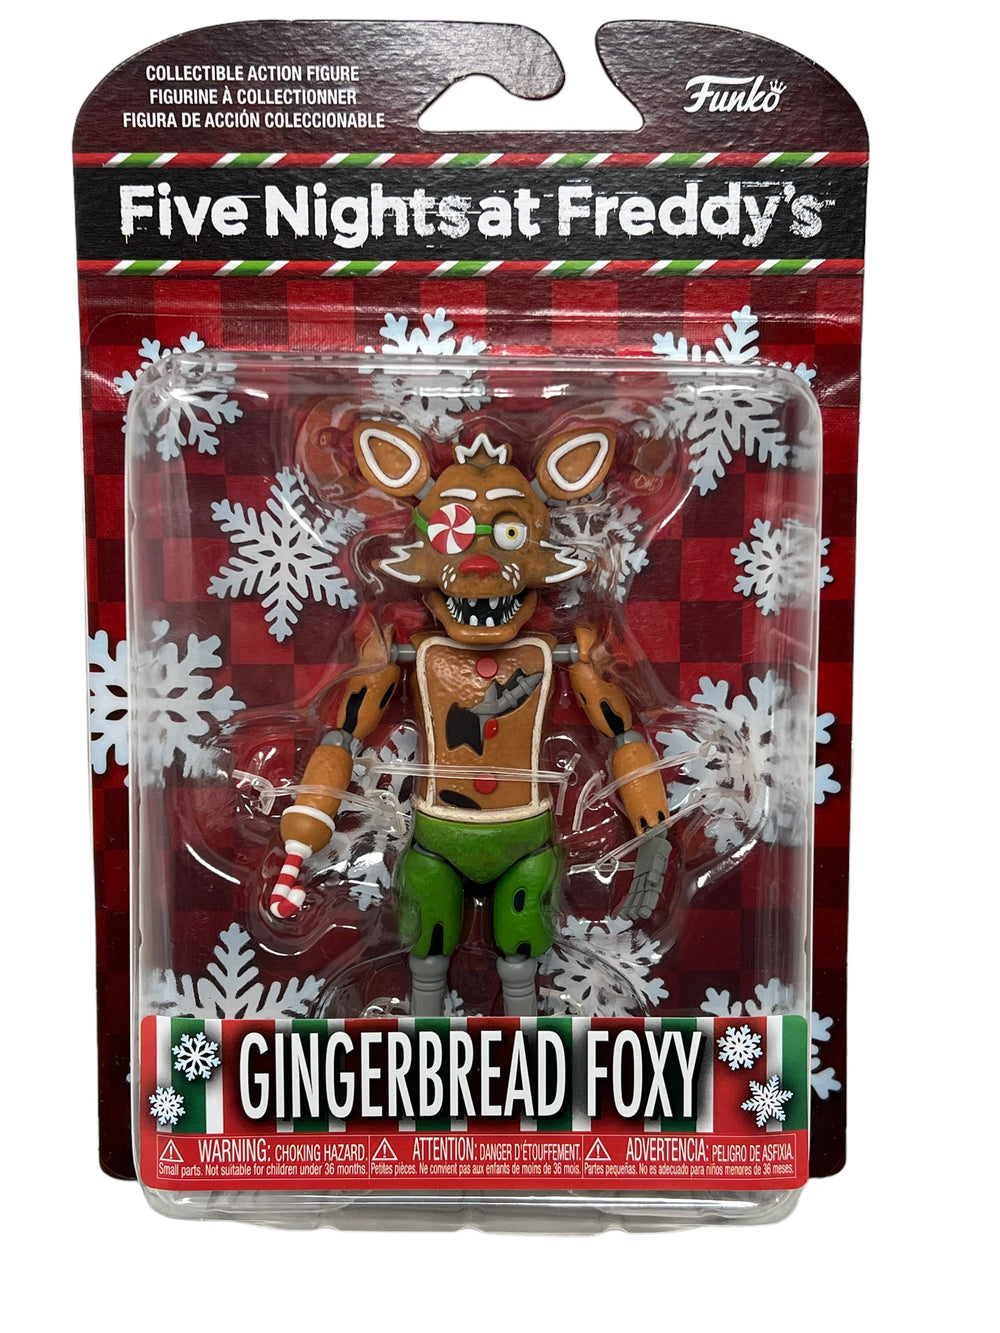 FNAF Five Nights at Freddy's Holiday Gingerbread Foxy Articulated Action Figure By Funko